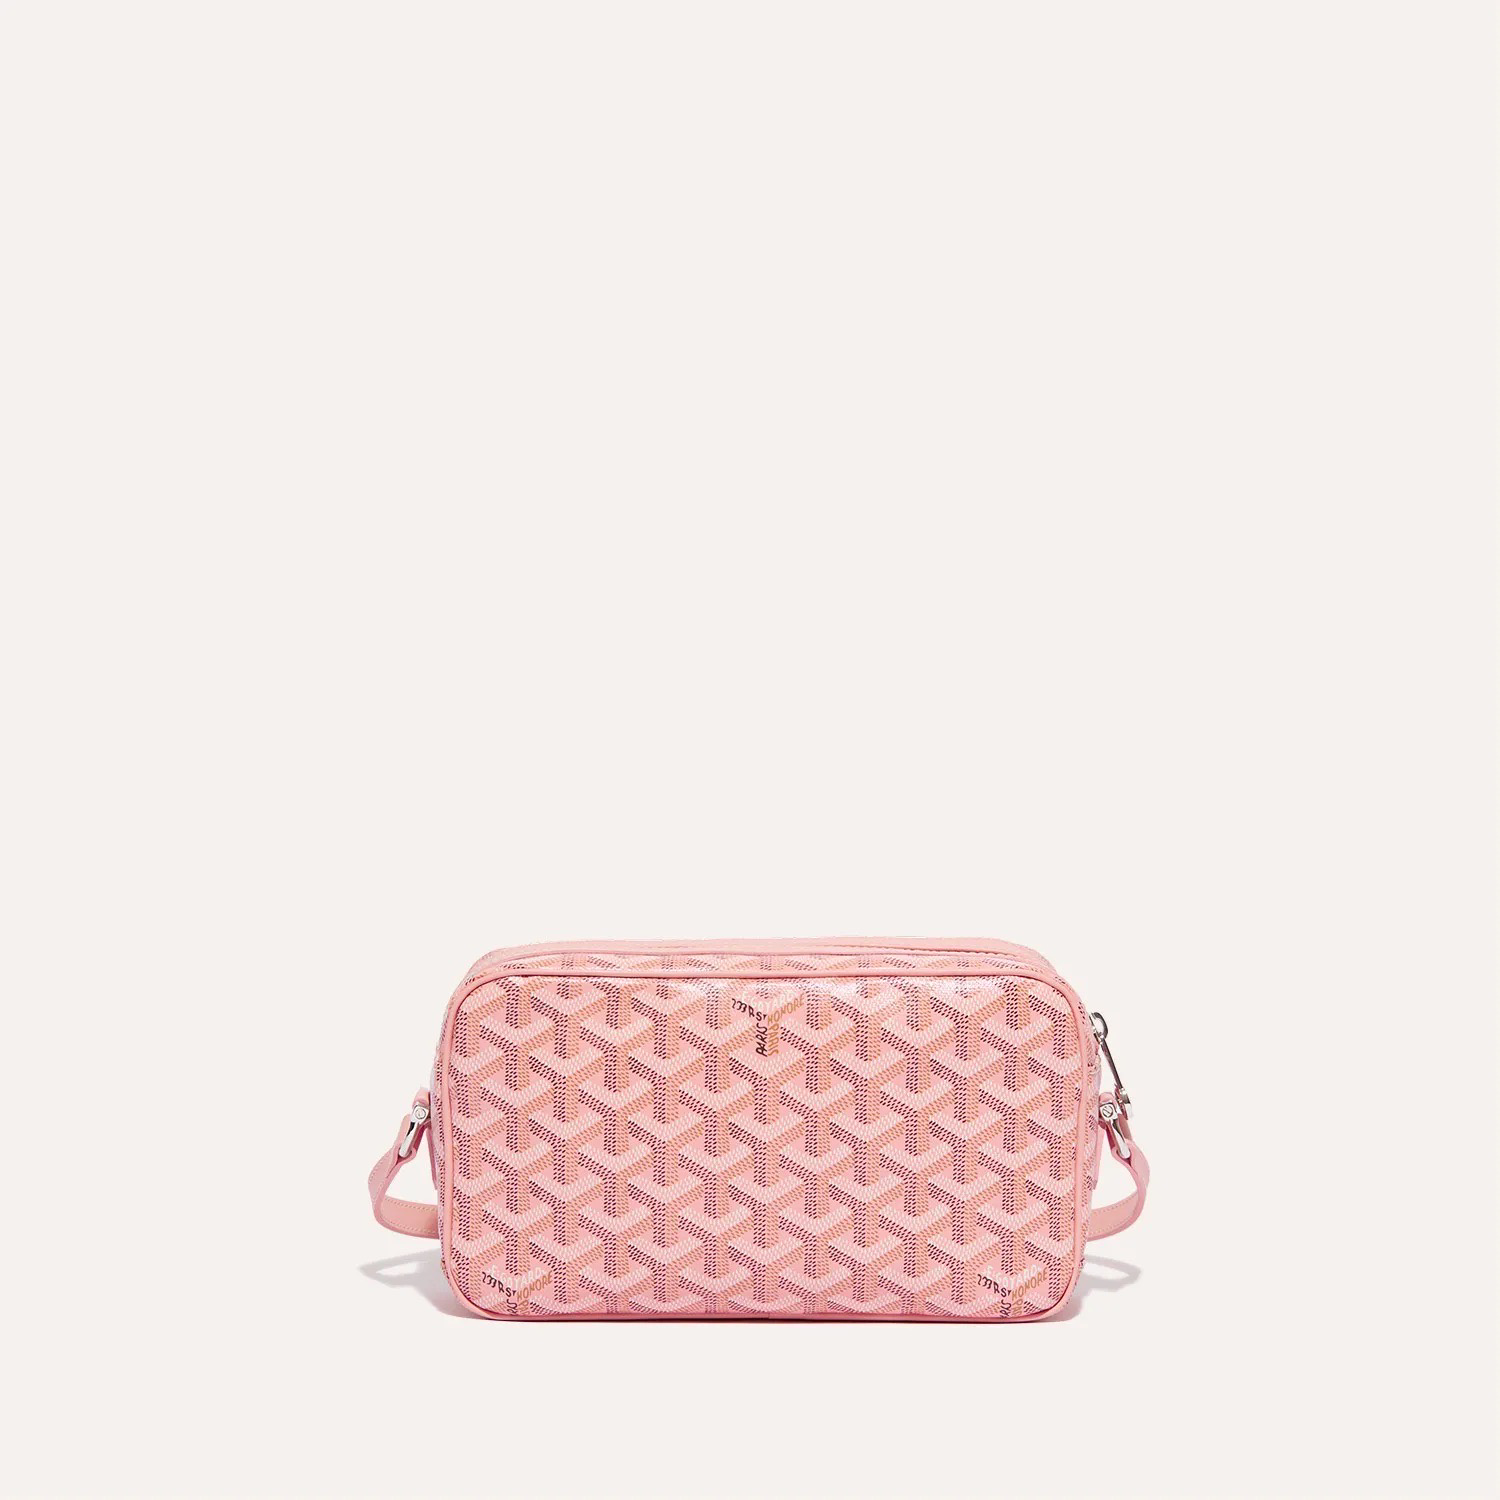 Goyard Cap-Vert PM Bag Powder Pink in Canvas/Leather with Silver